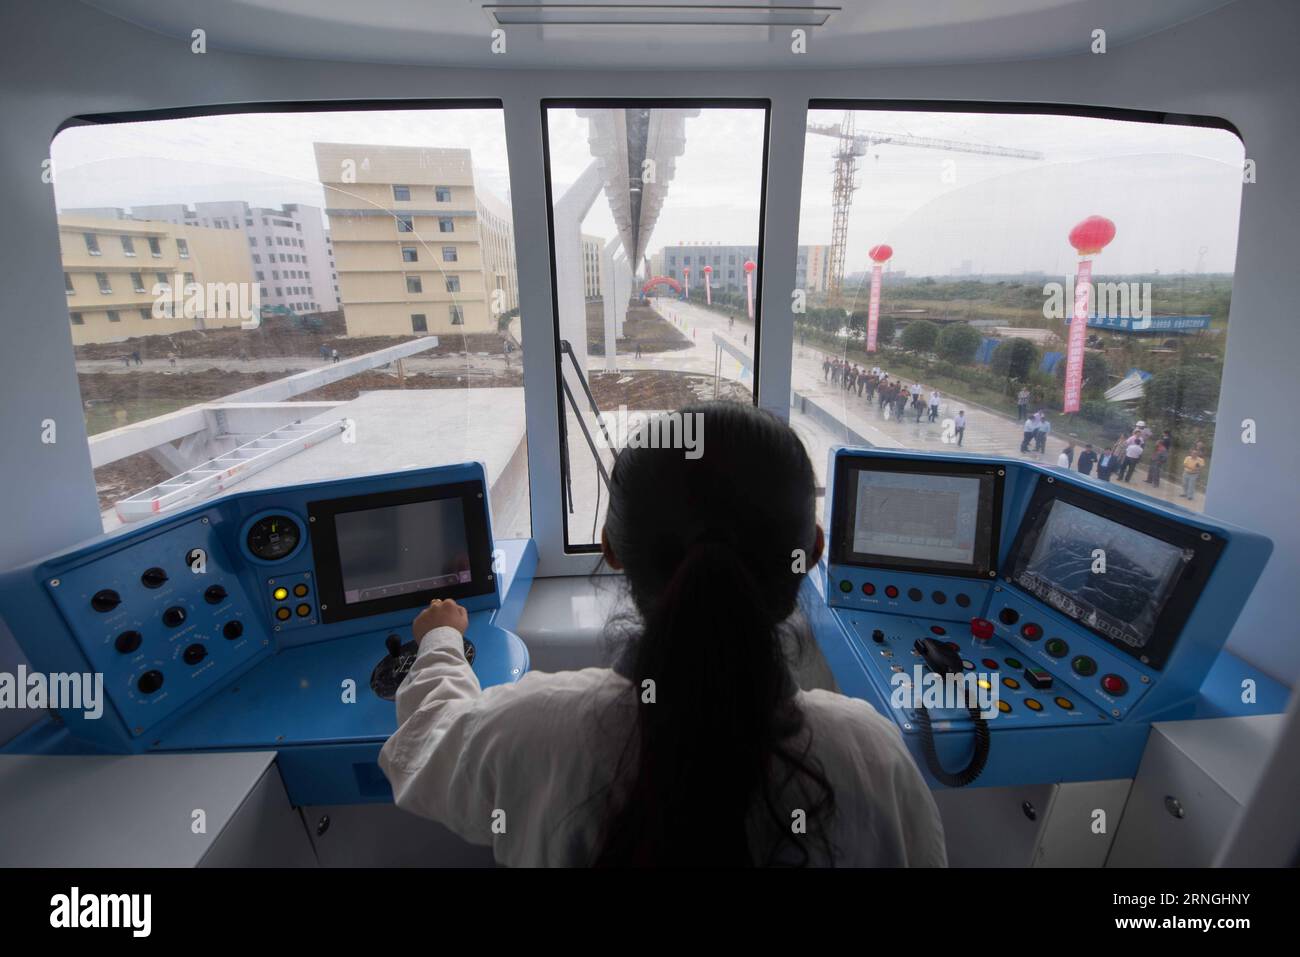 Schwebebahn in Chengdu, China (160930) -- CHENGDU, Sept. 30, 2016 -- A working staff operates a lithium-battery powered train which is suspended from a railway line during a test run in Chengdu, southwest China s Sichuan Province, Sept. 30, 2016. China s first suspension railway line finished its test run Friday. The train, which has a speed of 60 km per hour, successfully ran along the 300-meter test section of the railway line after being suspended from the line.) (mp) CHINA-CHENGDU-SUSPENSION RAILWAY-TEST RUN (CN) JiangxHongjing PUBLICATIONxNOTxINxCHN   Levitation train in Chengdu China  Ch Stock Photo